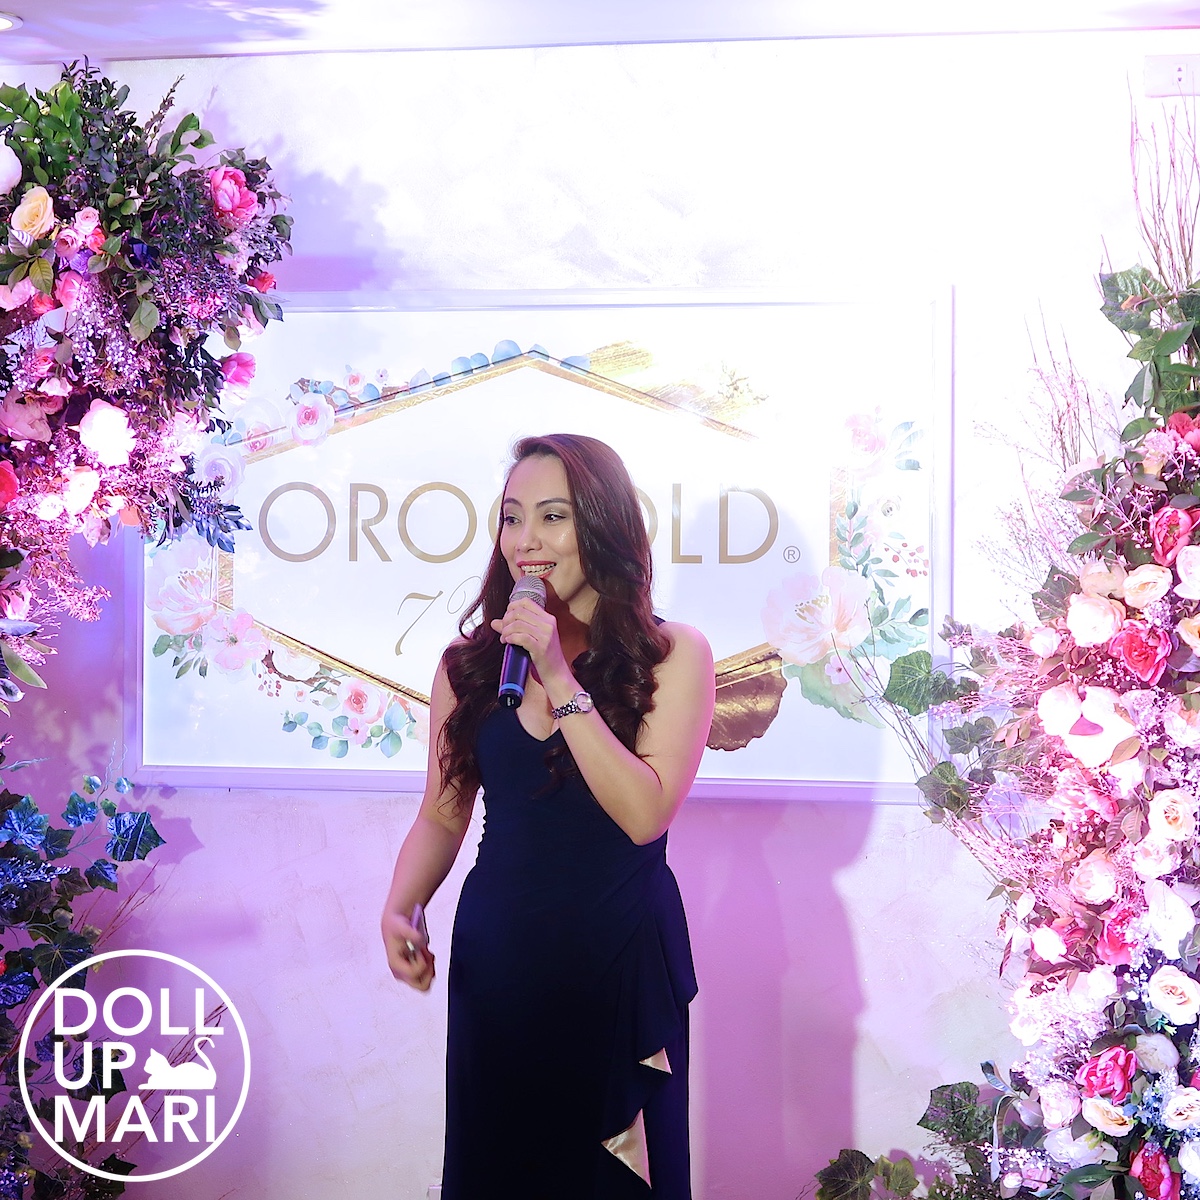 Happy 7th Anniversary, Orogold Philippines! (August 1, 2018) - Doll Up Mari